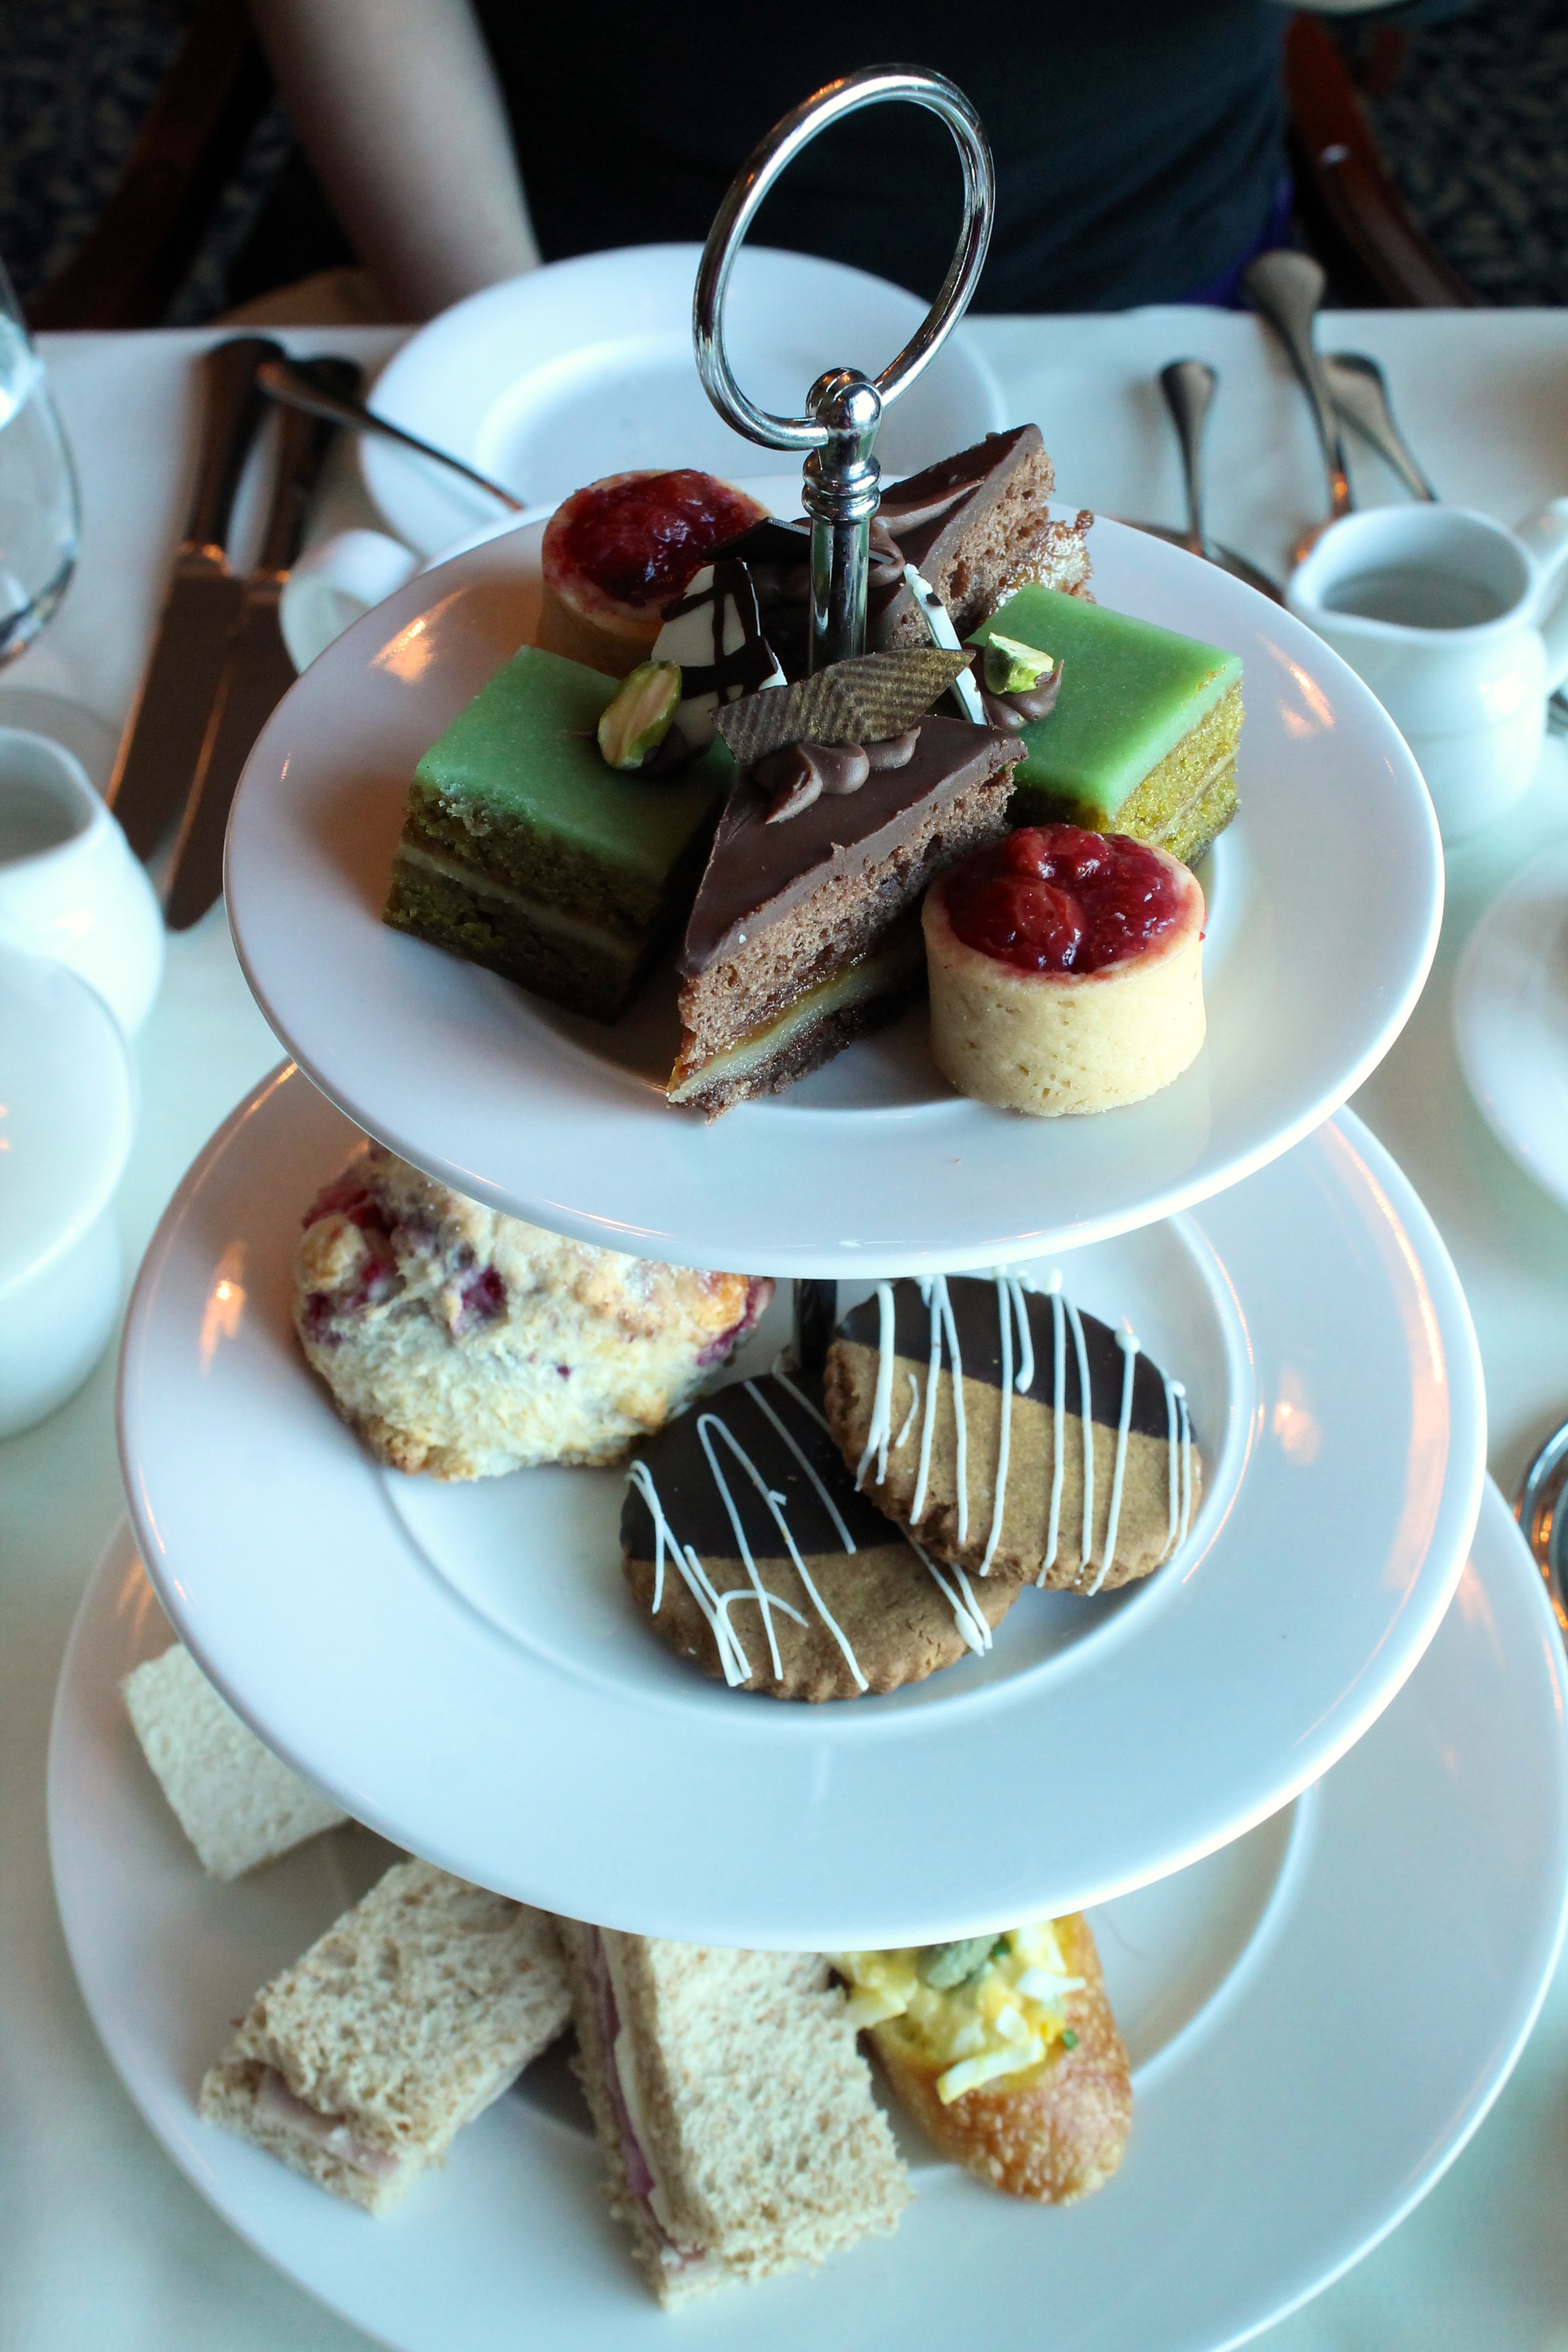 Afternoon tea at the Oak Bay Beach Hotel